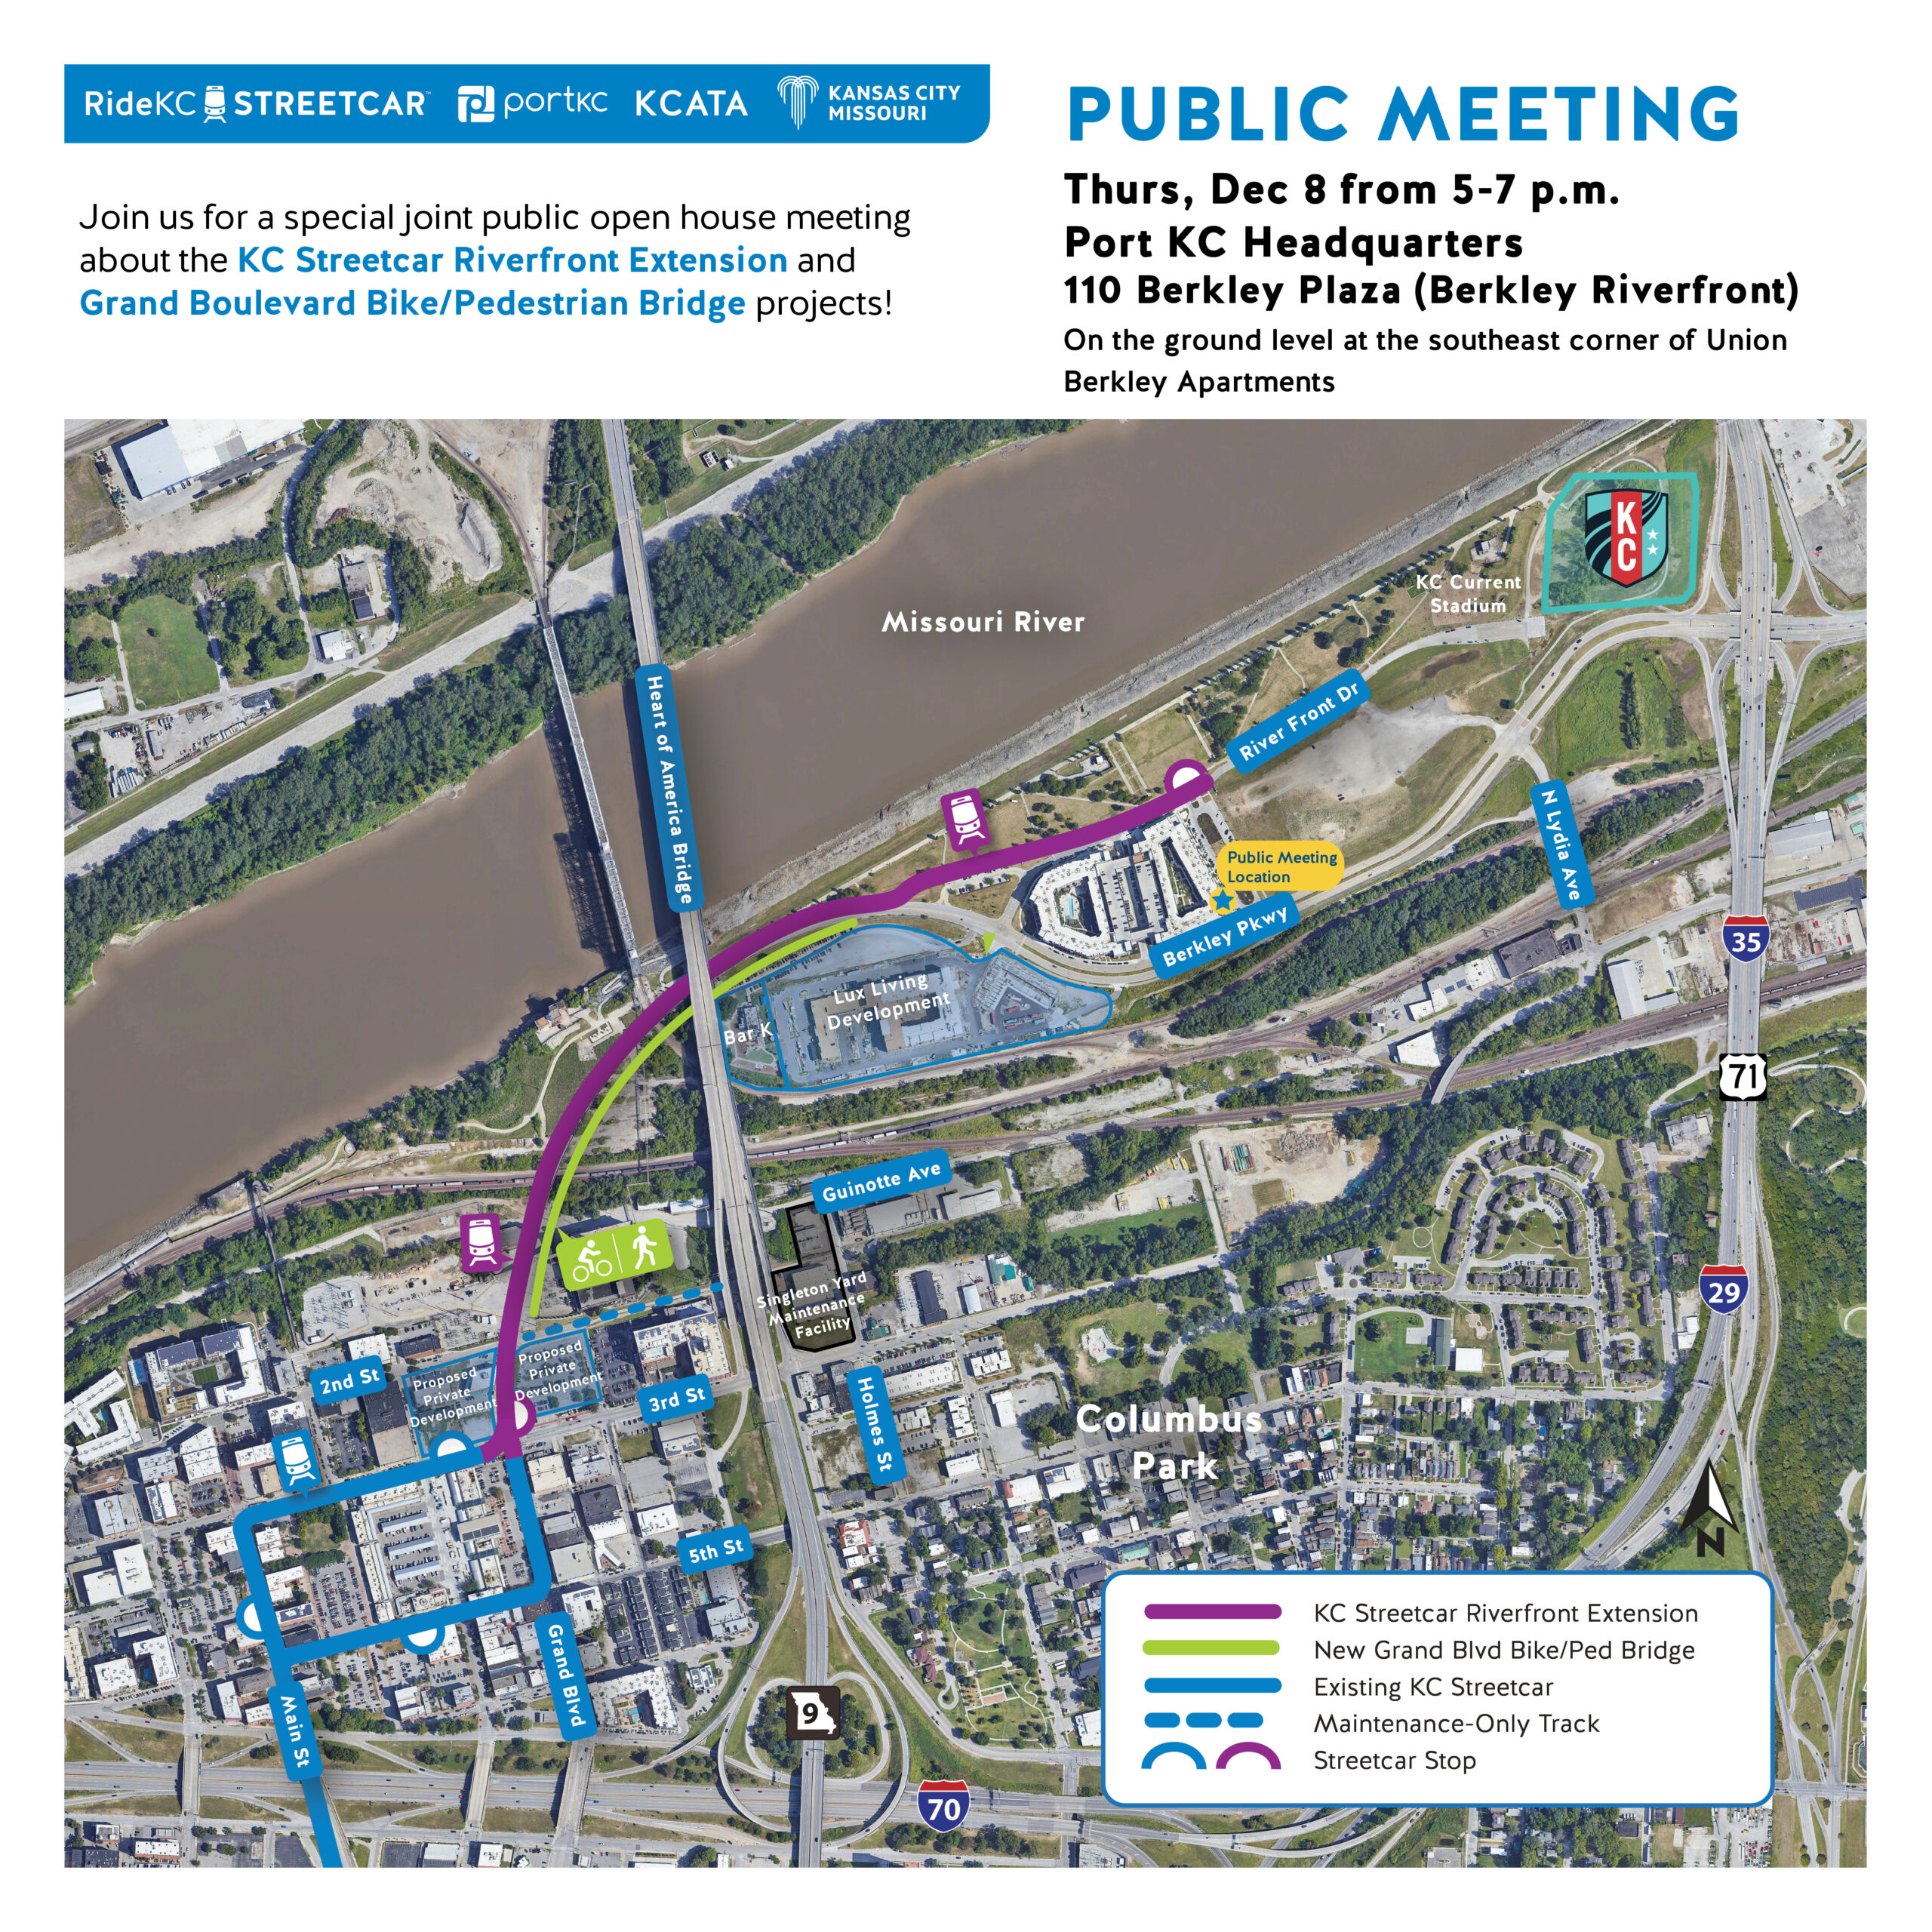 Meeting Notice including map of KC Riverfront